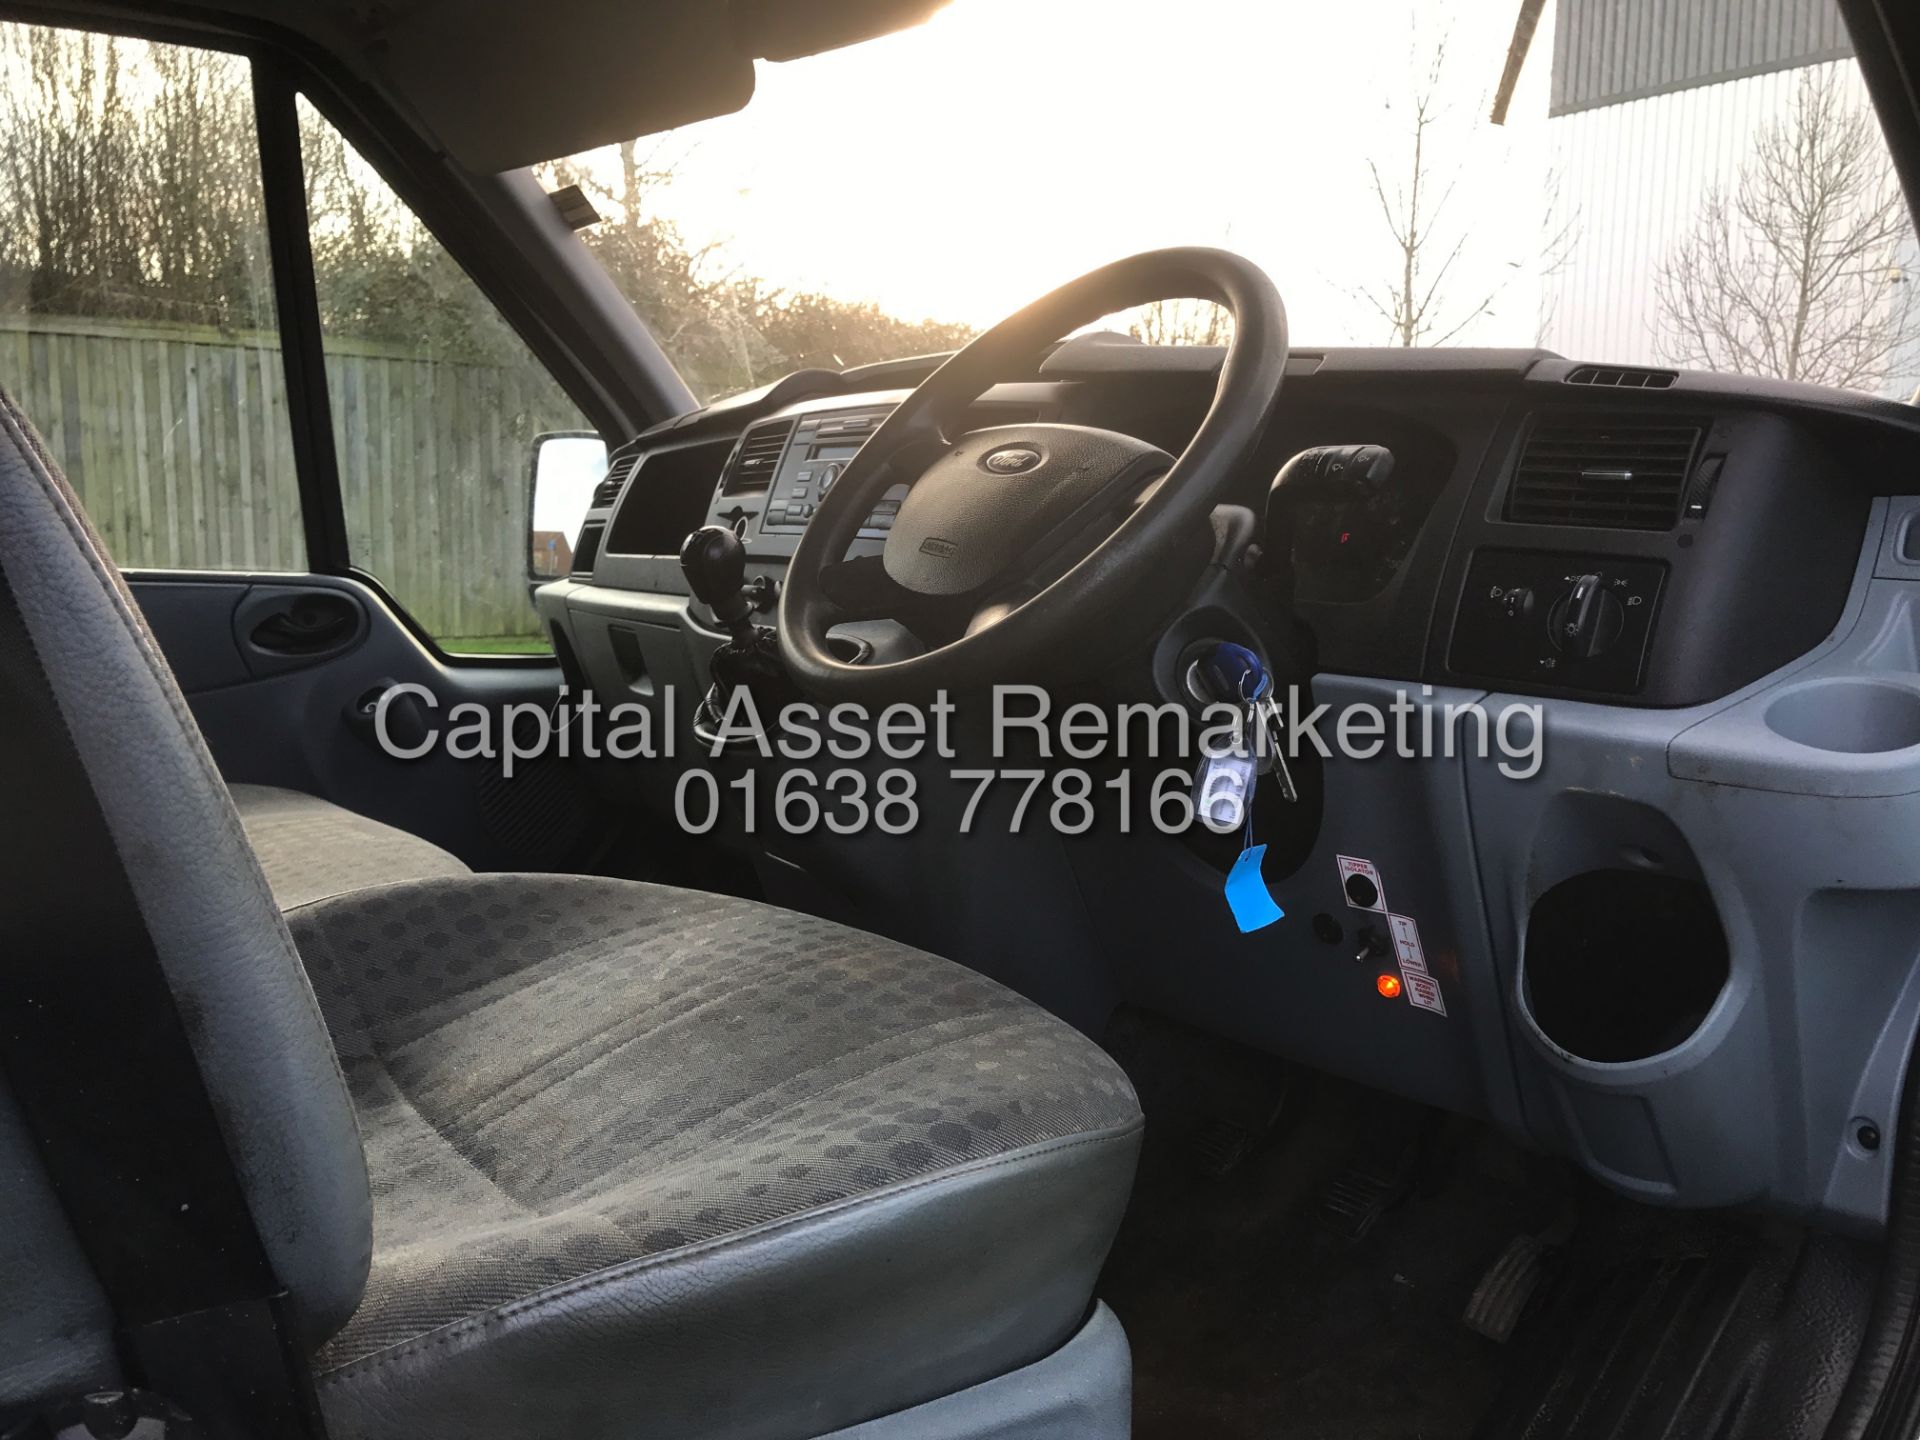 FORD TRANSIT 2.2TDCI T350 LWB TWIN REAR WHEEL "TIPPER" DOUBLE CAB (13 REG) 1 OWNER- LONDON COMPLIANT - Image 12 of 19